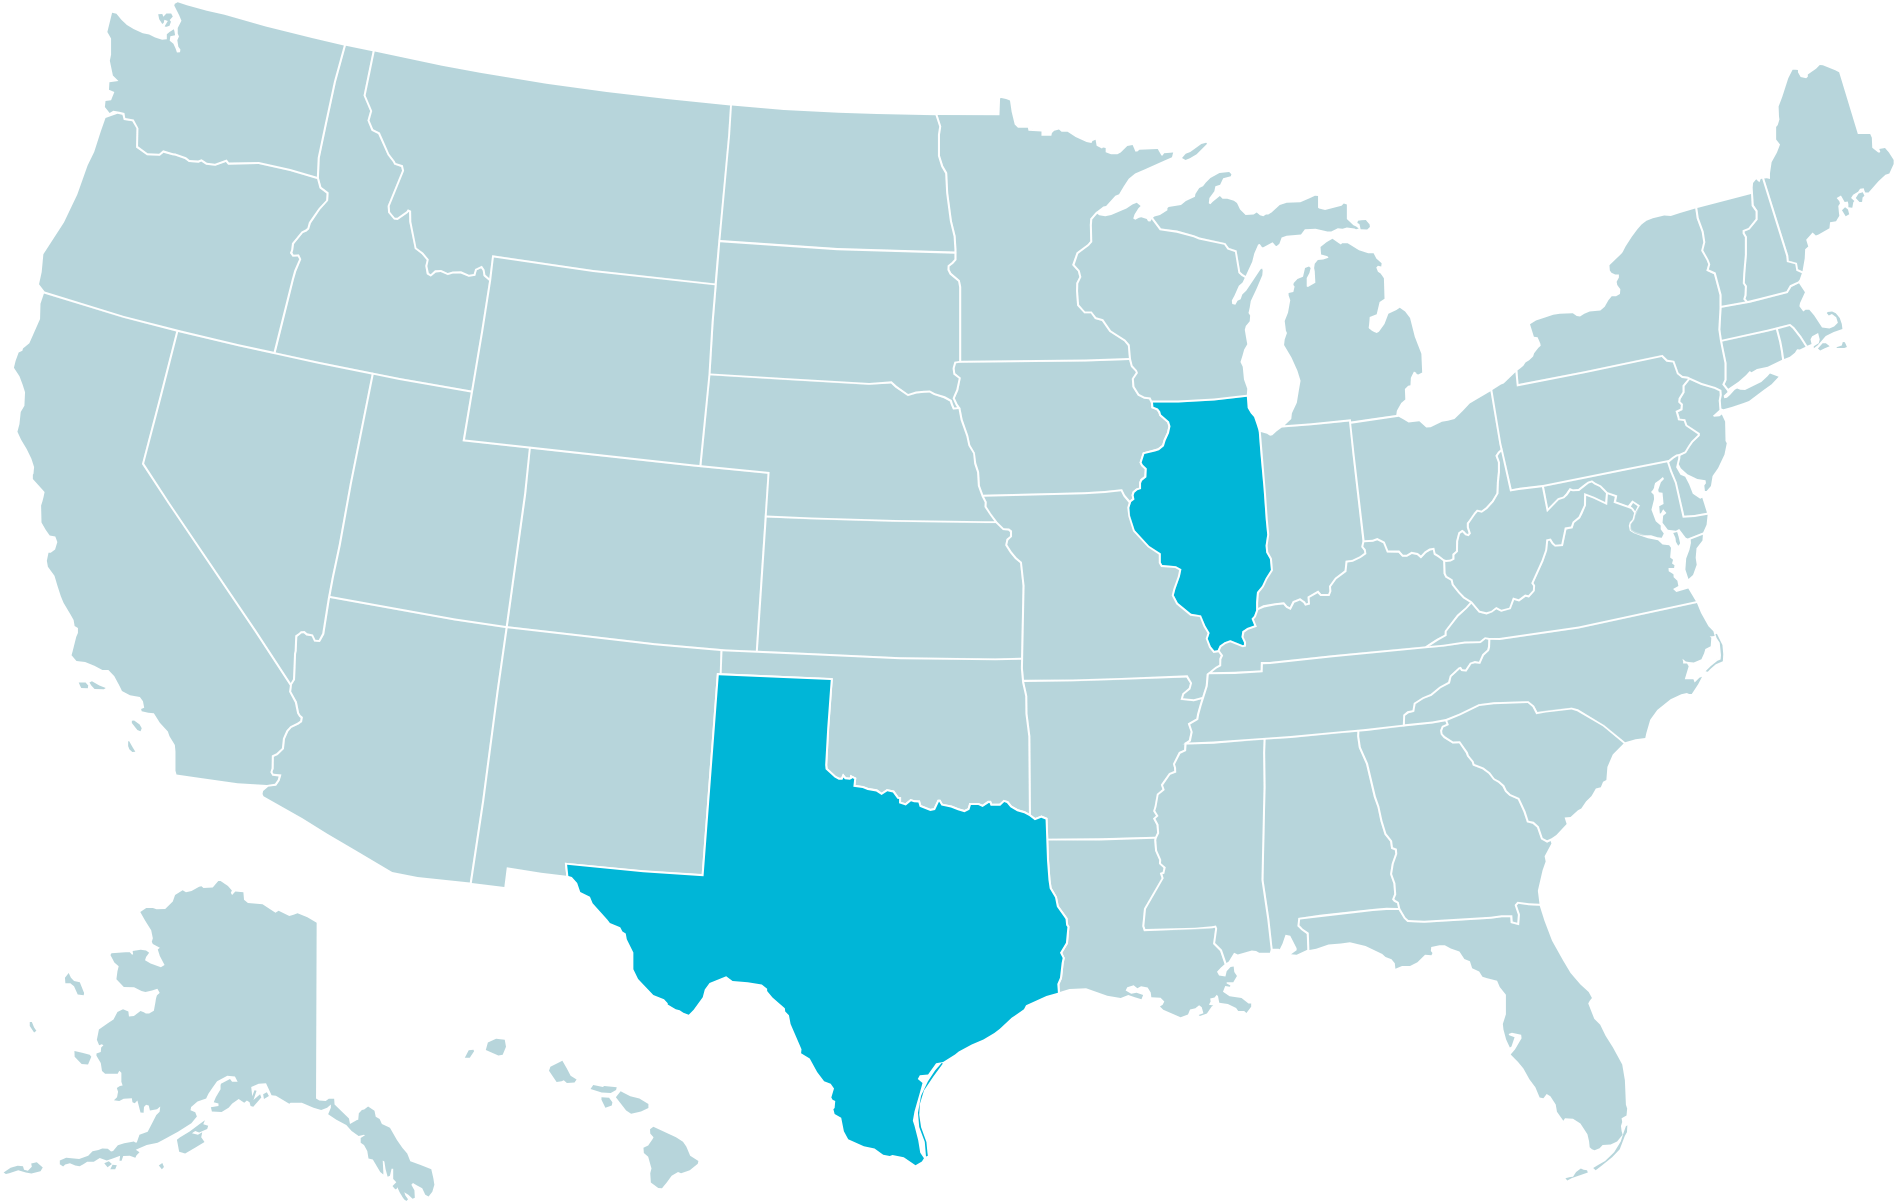 Map of U.S. states showing participating dentists in Illinois and Texas